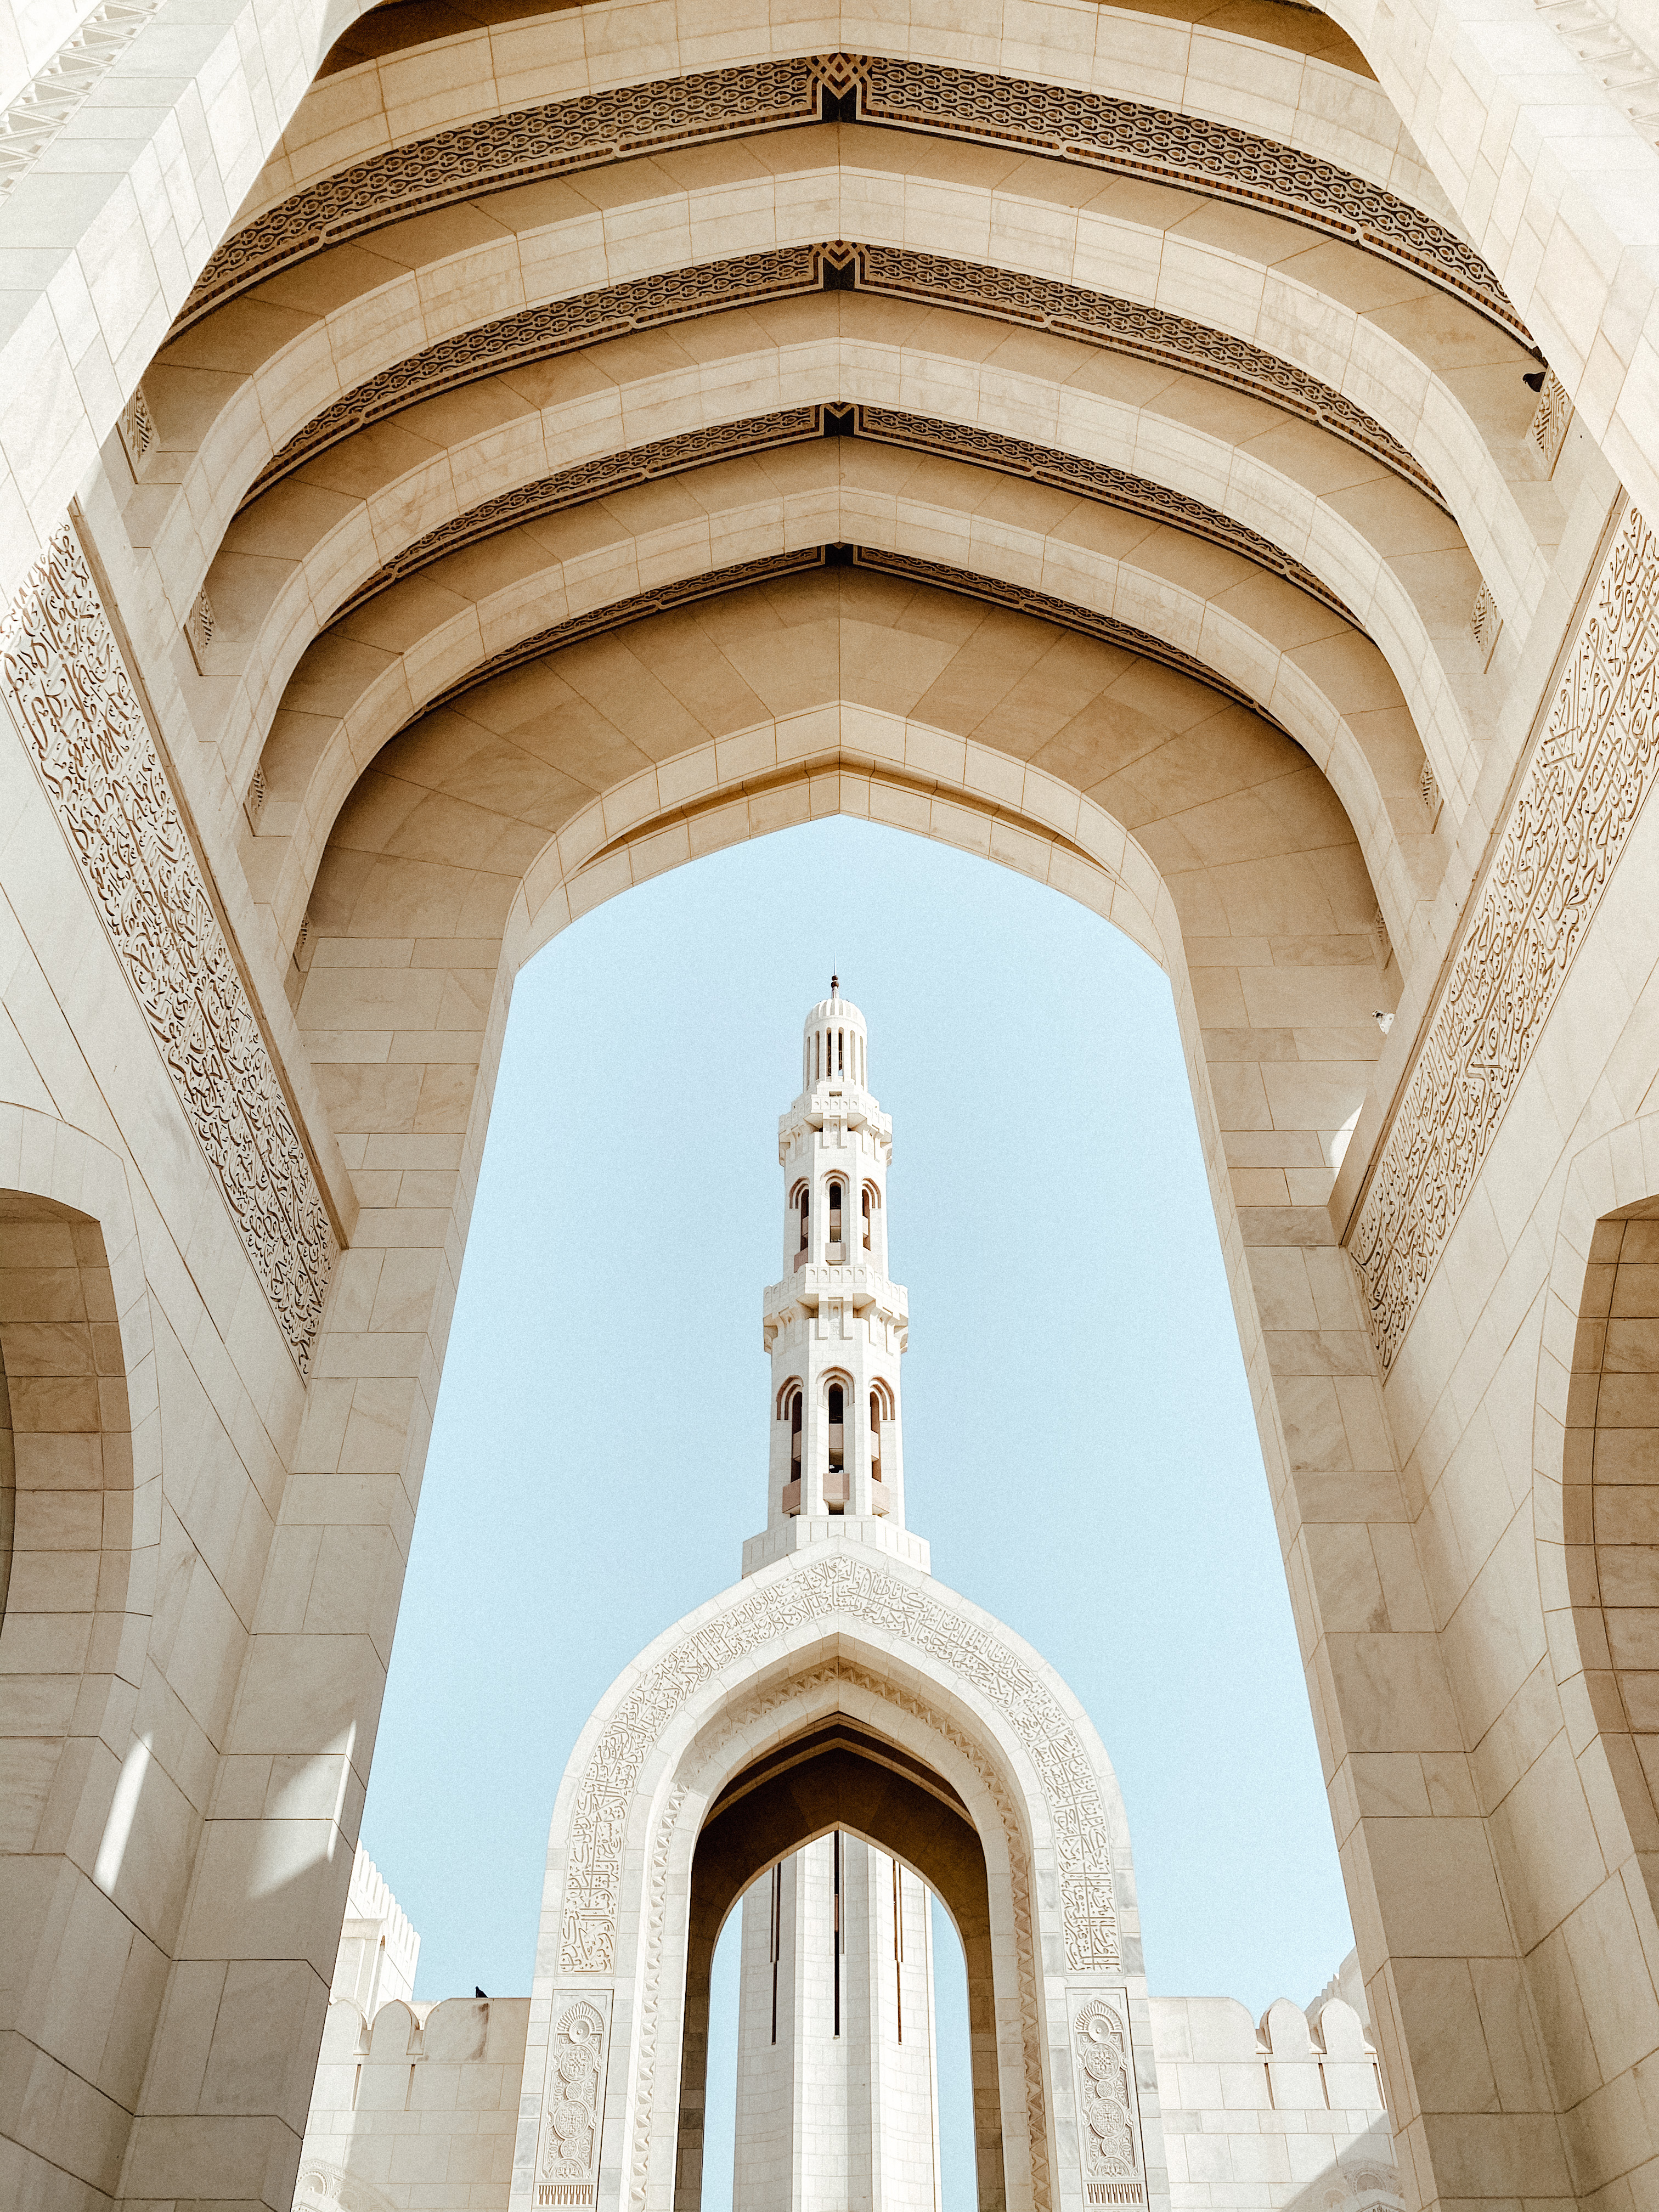 Arches and minarets of Sultan Qaboos Mosque, Muscat